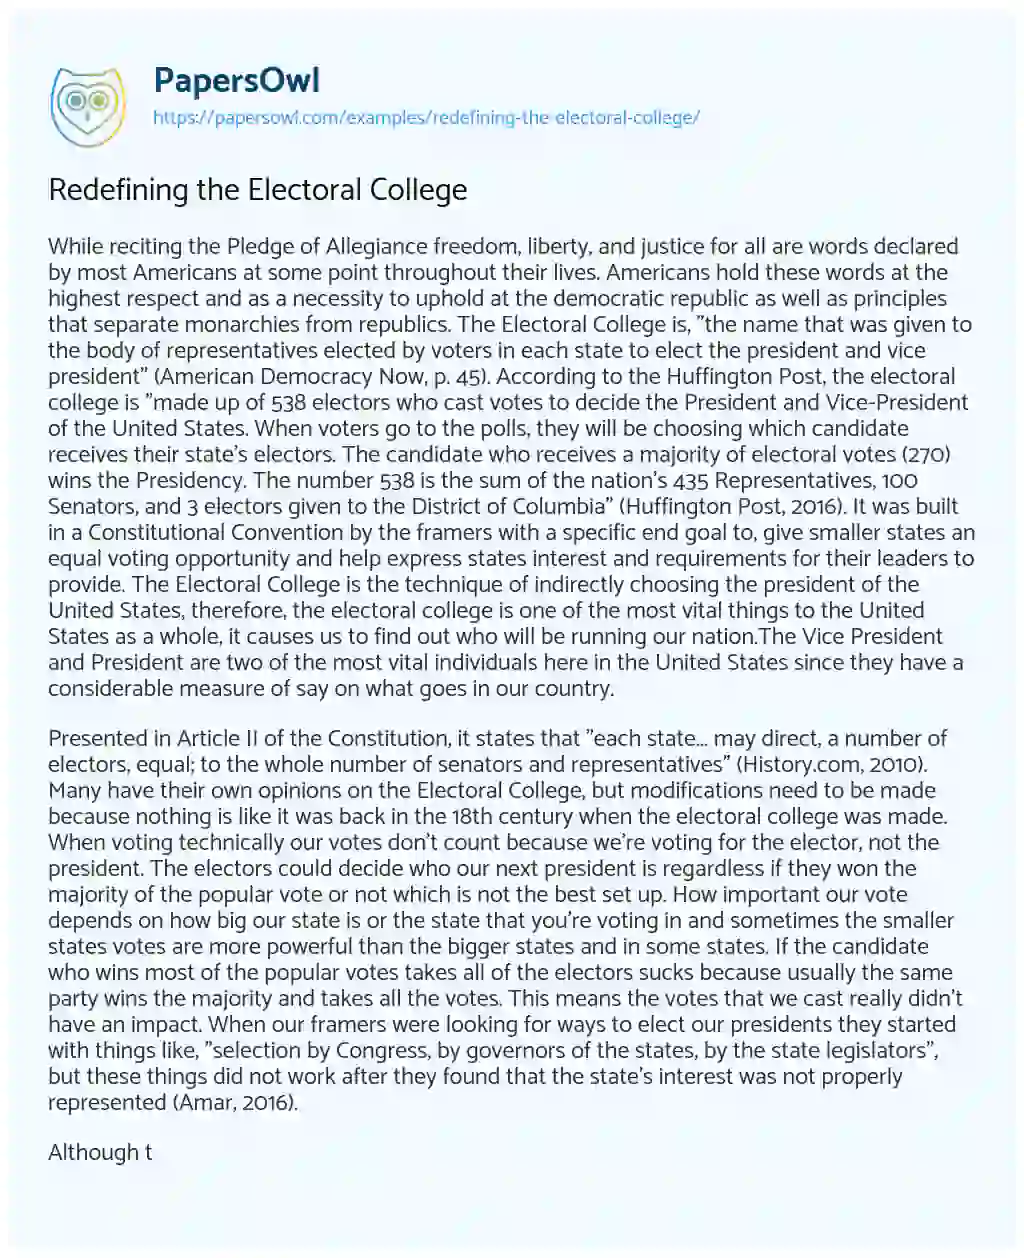 Essay on Redefining the Electoral College